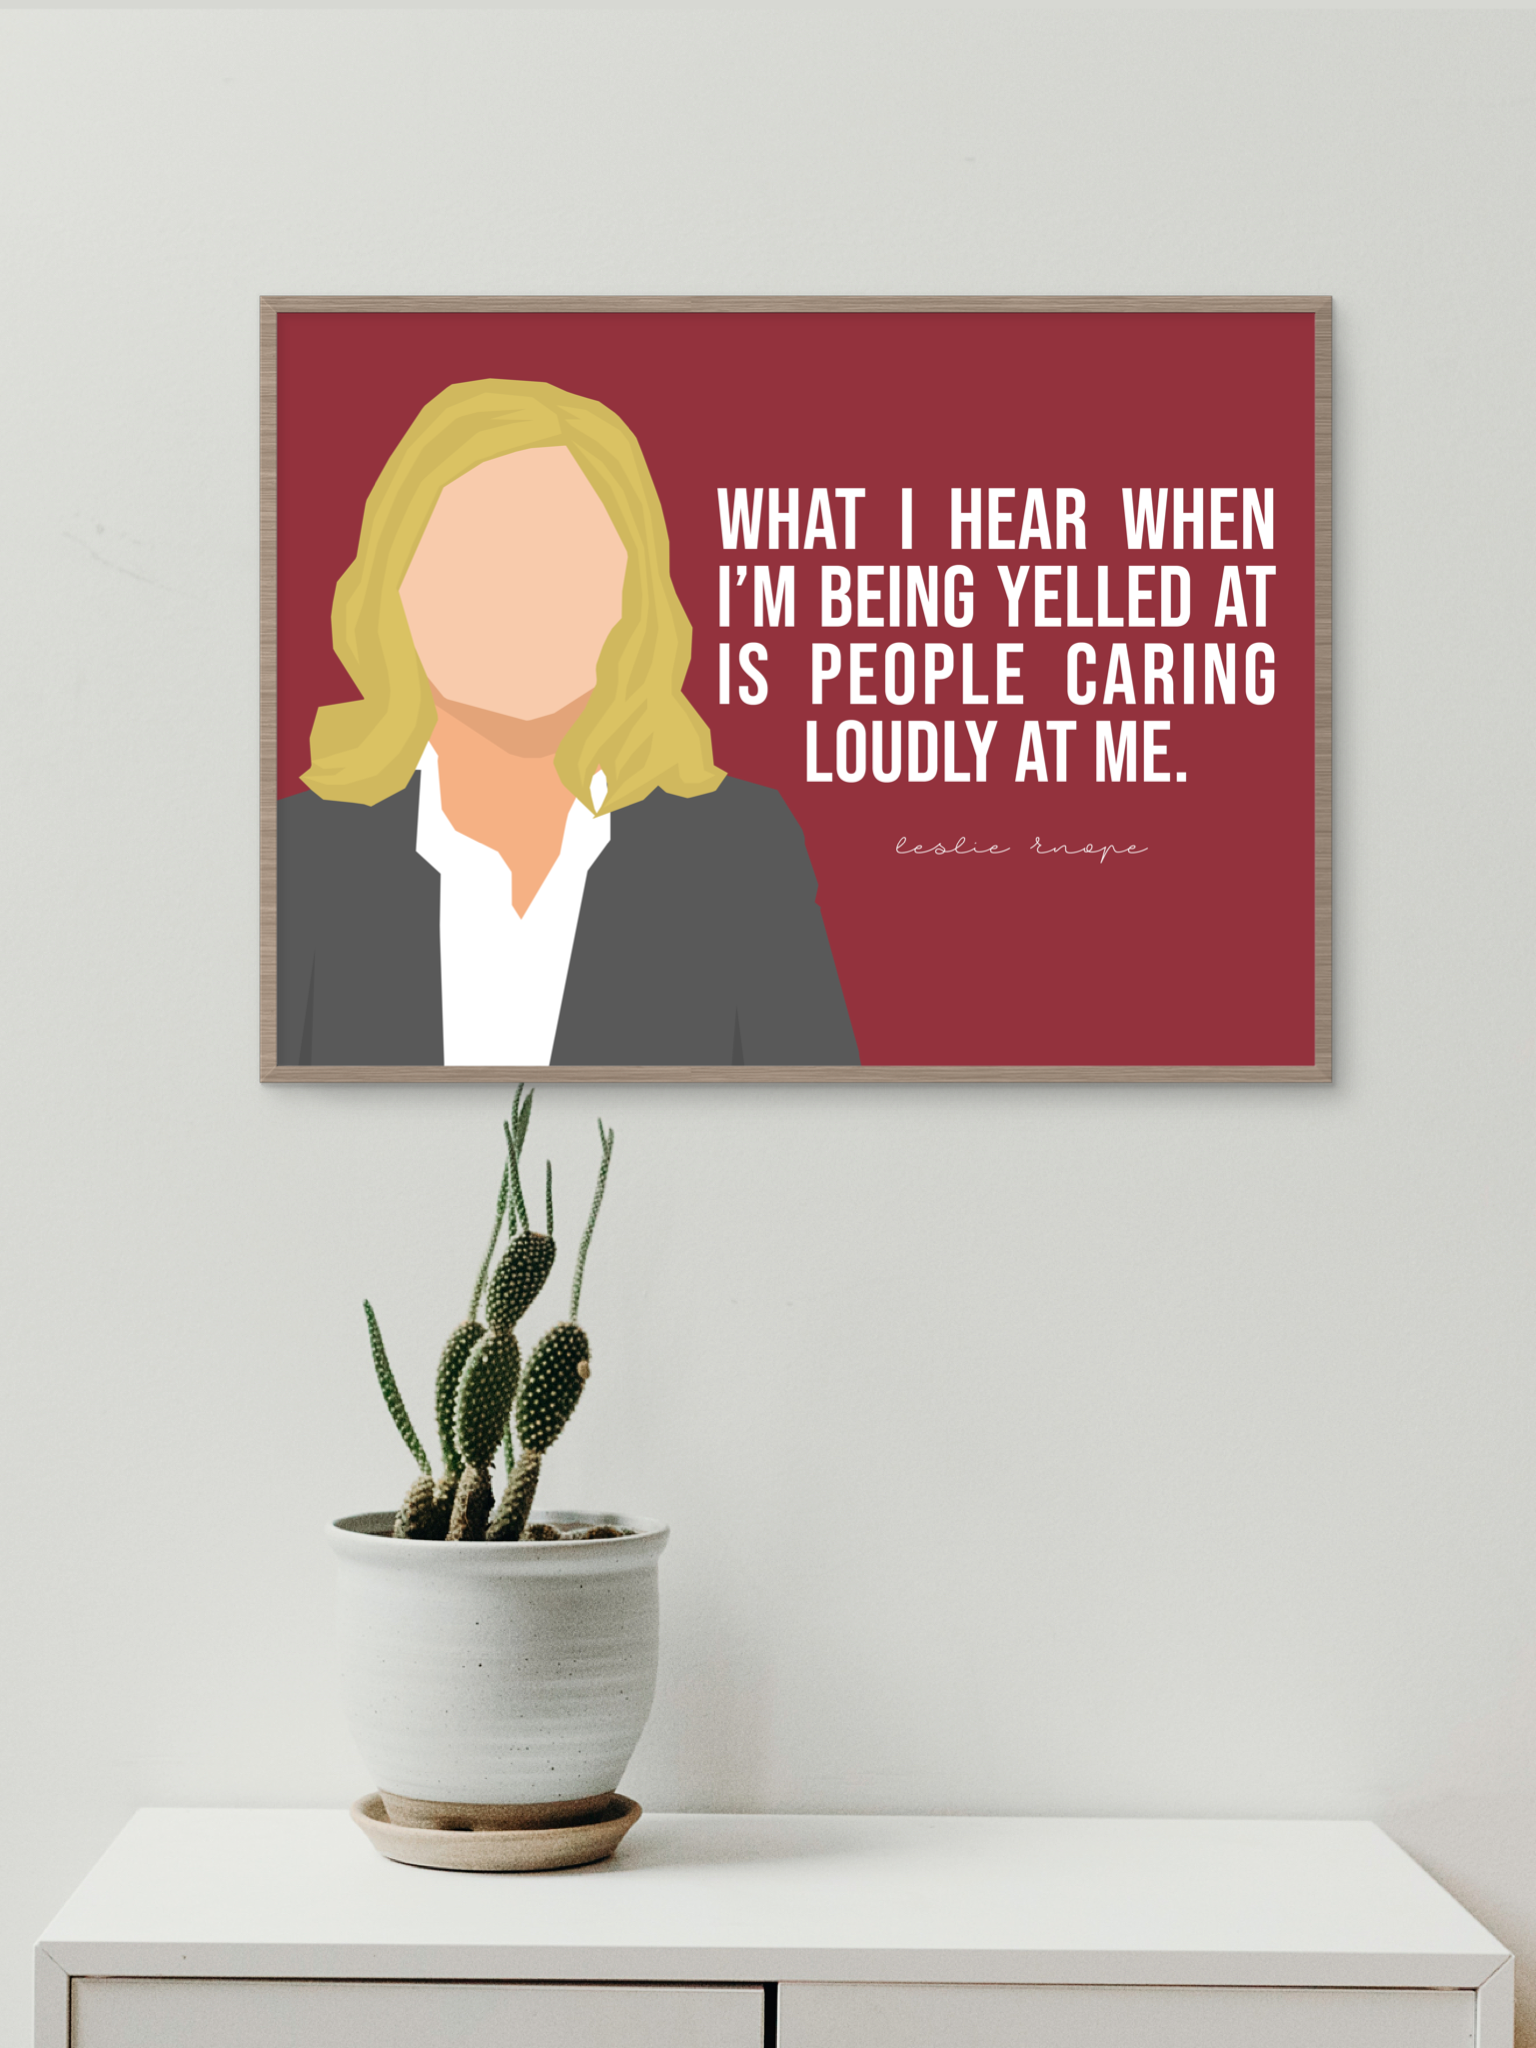 Leslie Knope "caring loudly" quote